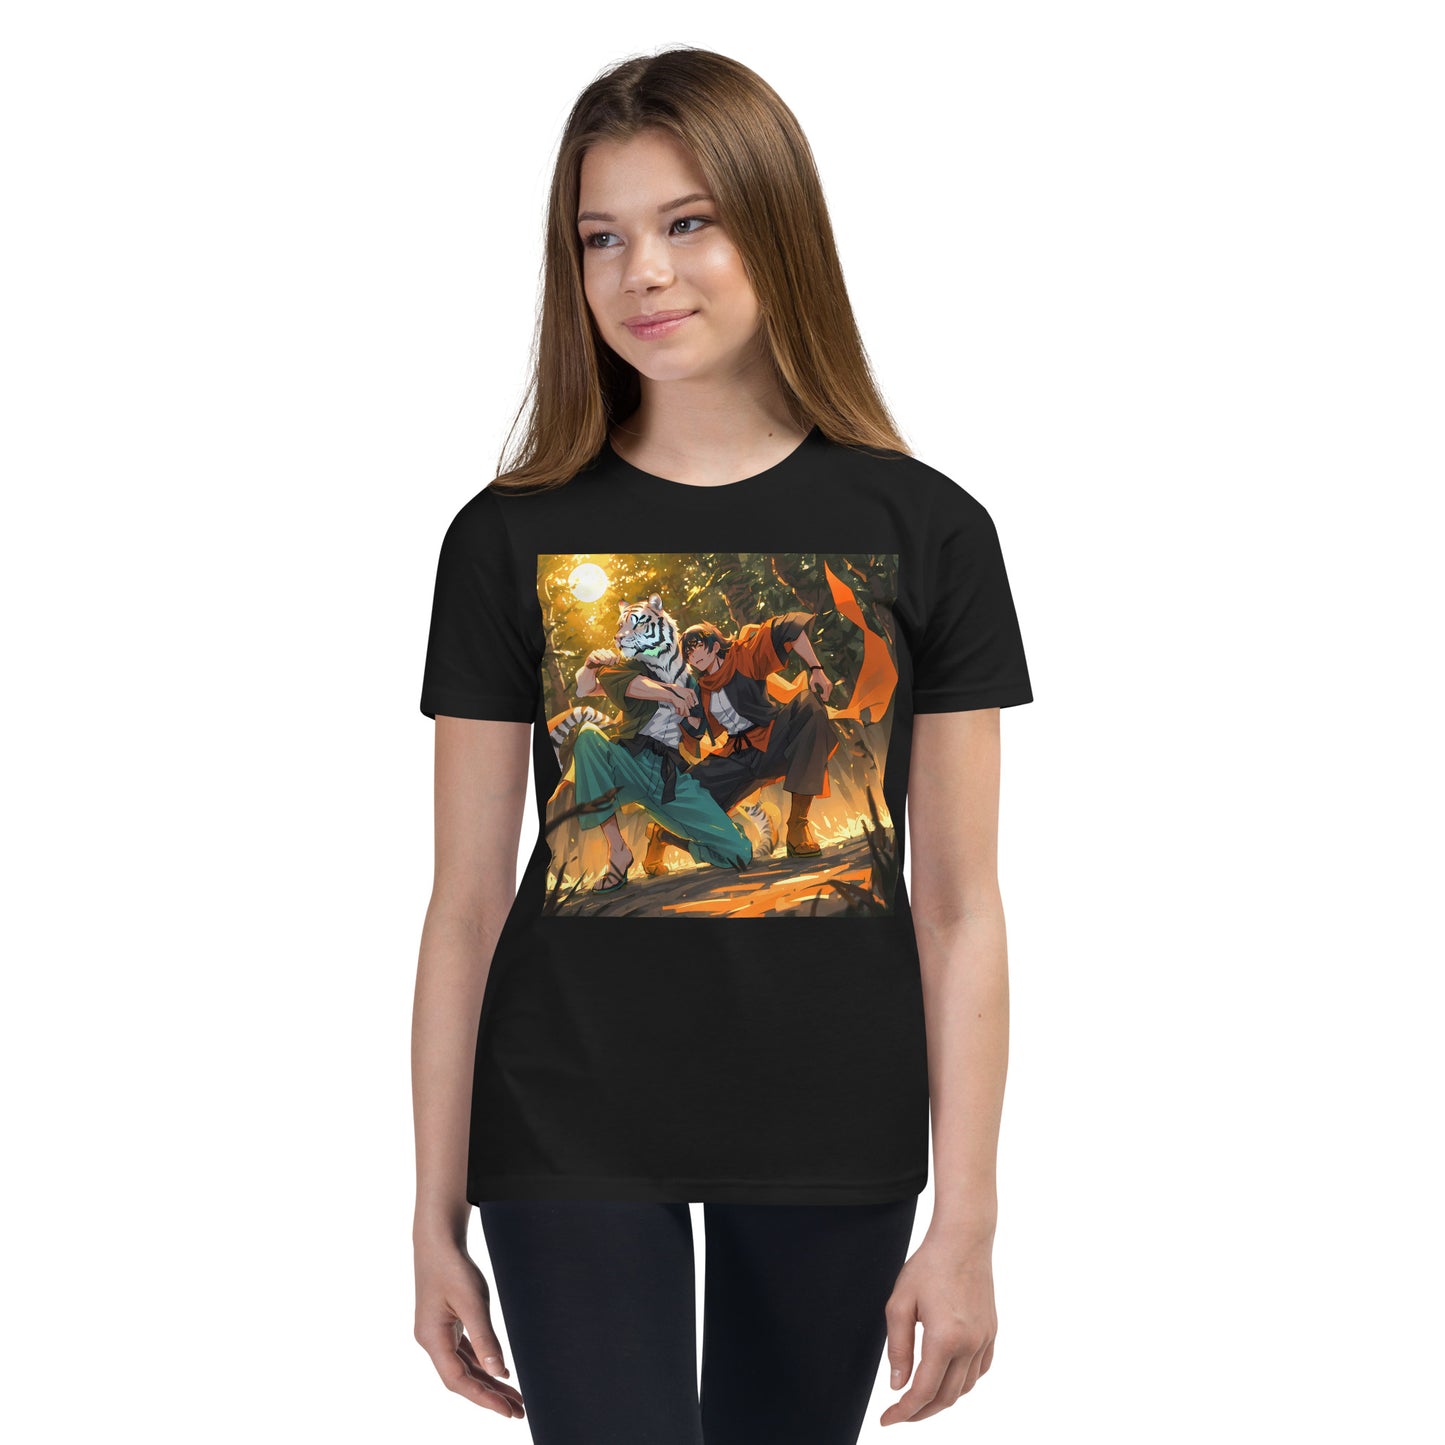 Youth Anime Friends in the ForestShort Sleeve T-Shirt